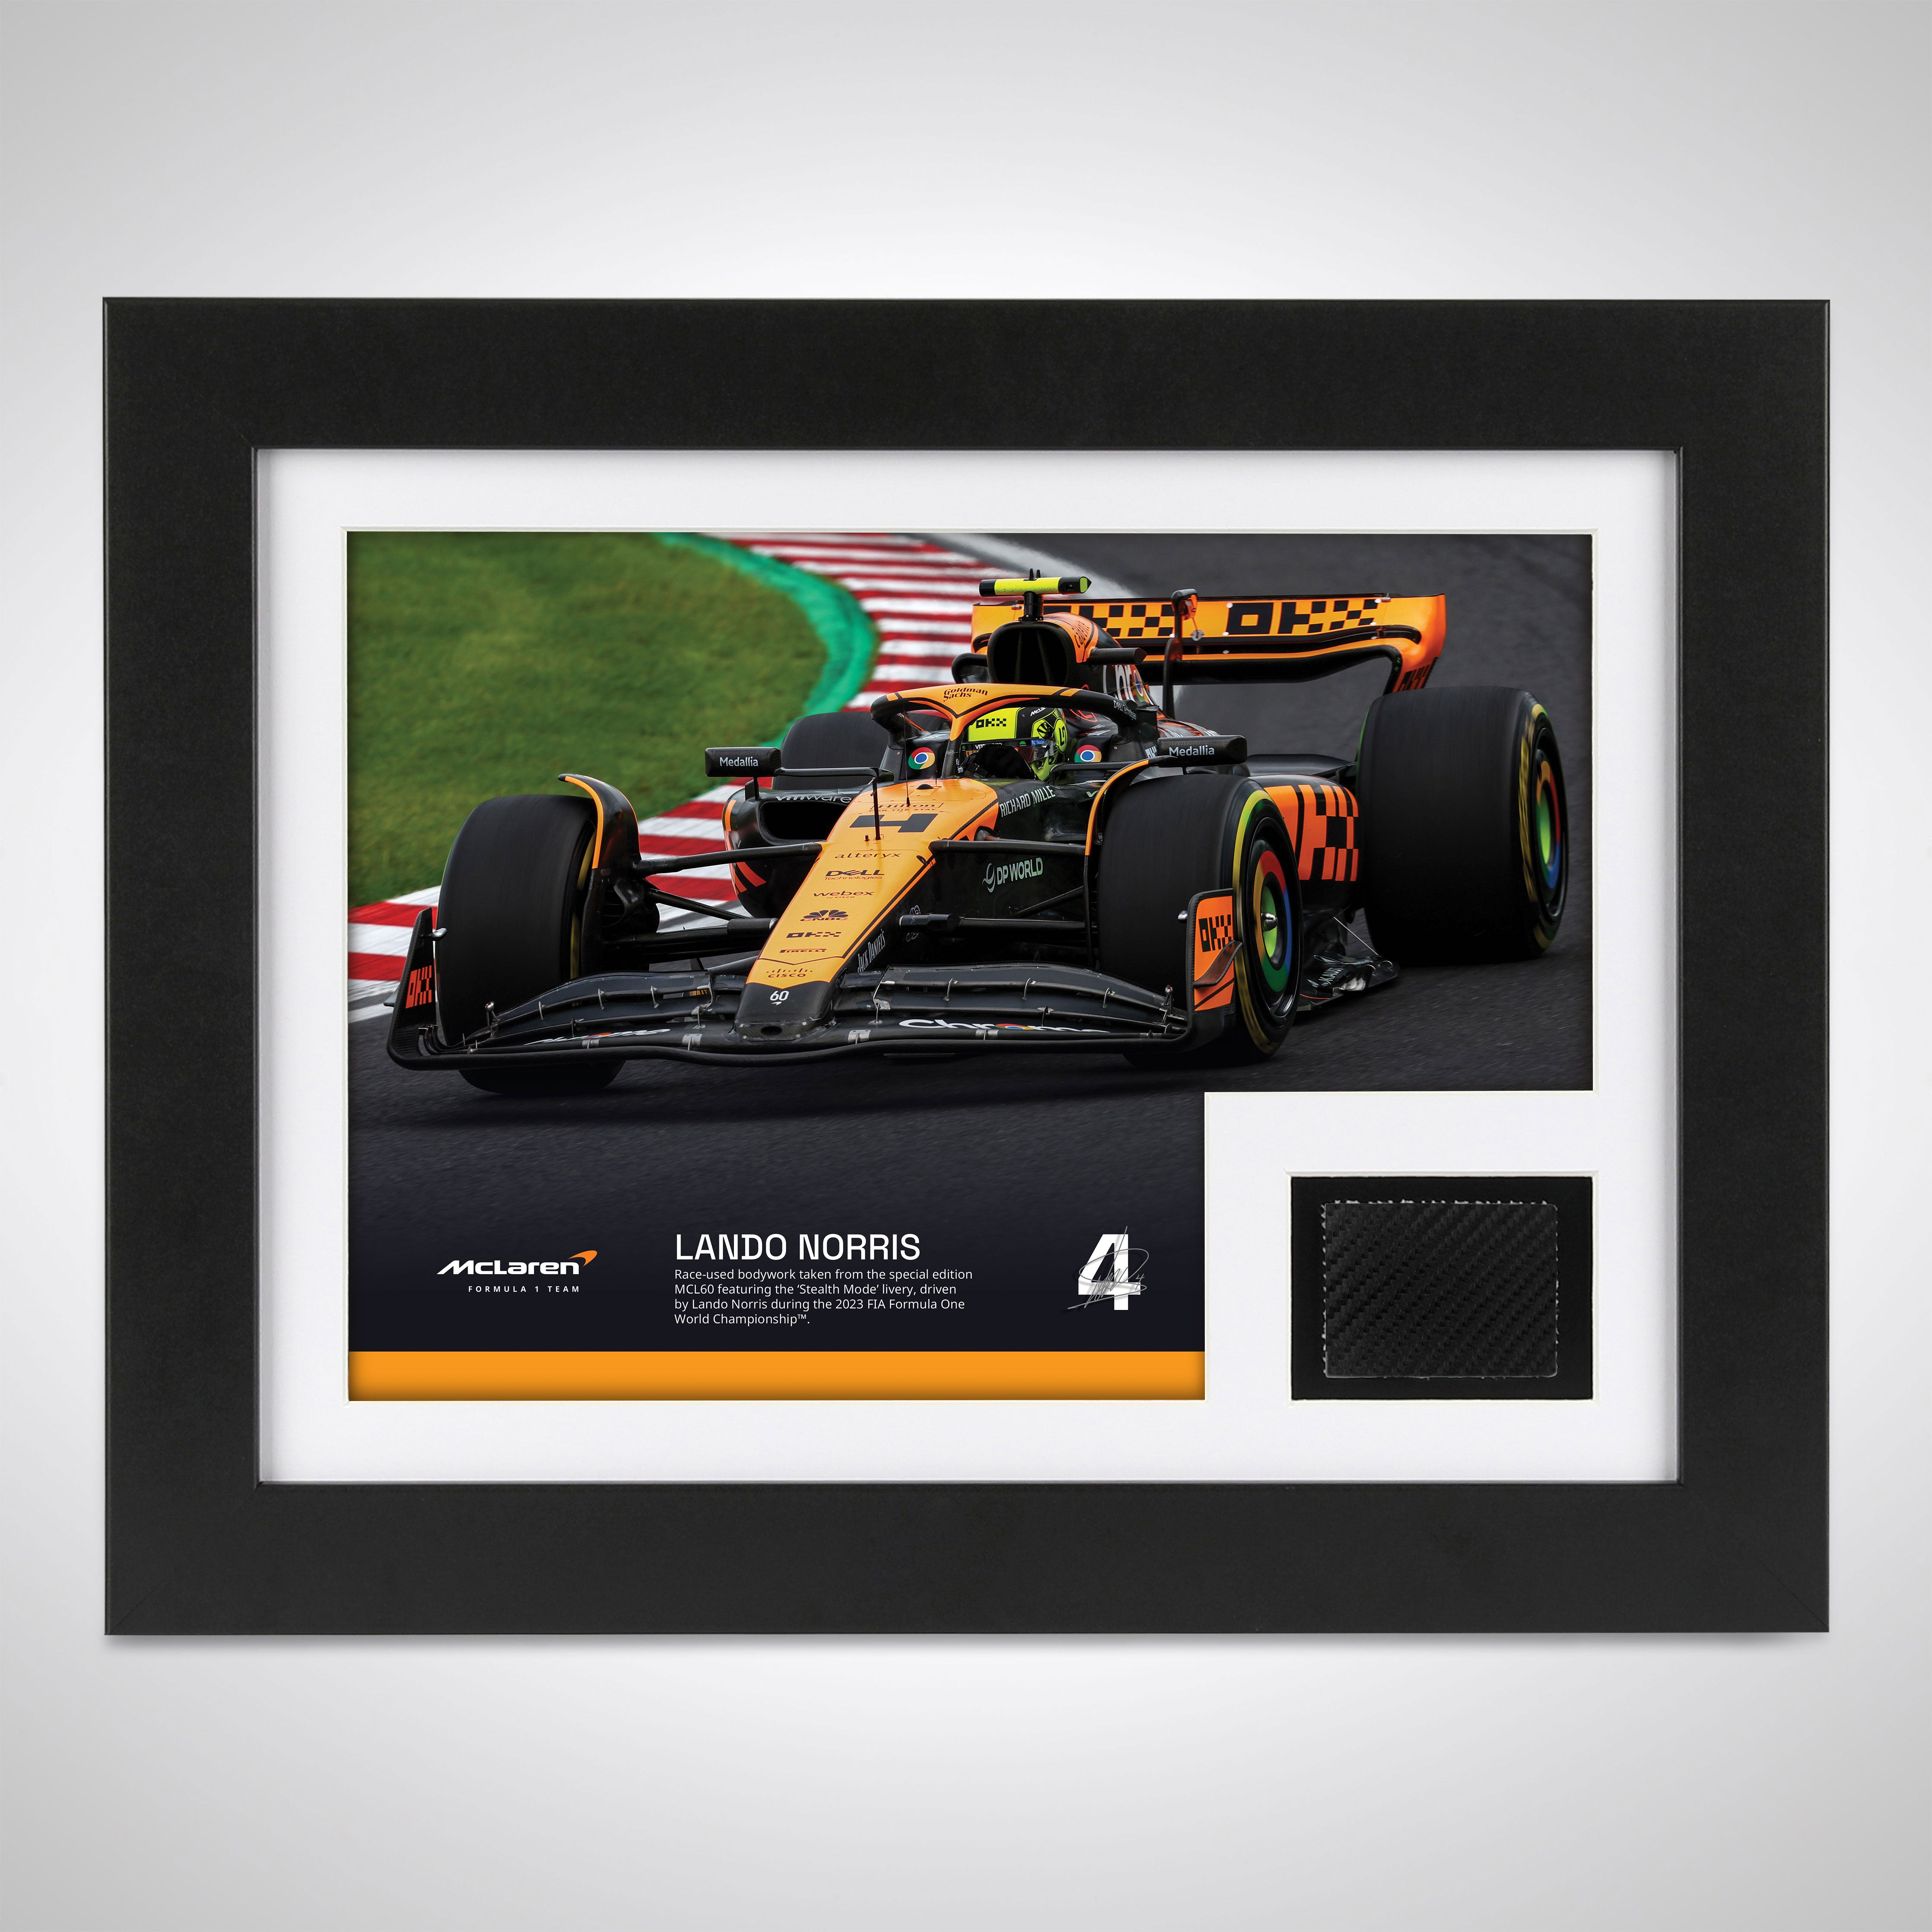 Browse all our F1® Memorabilia | Shop Official F1 Merchandise | F1 